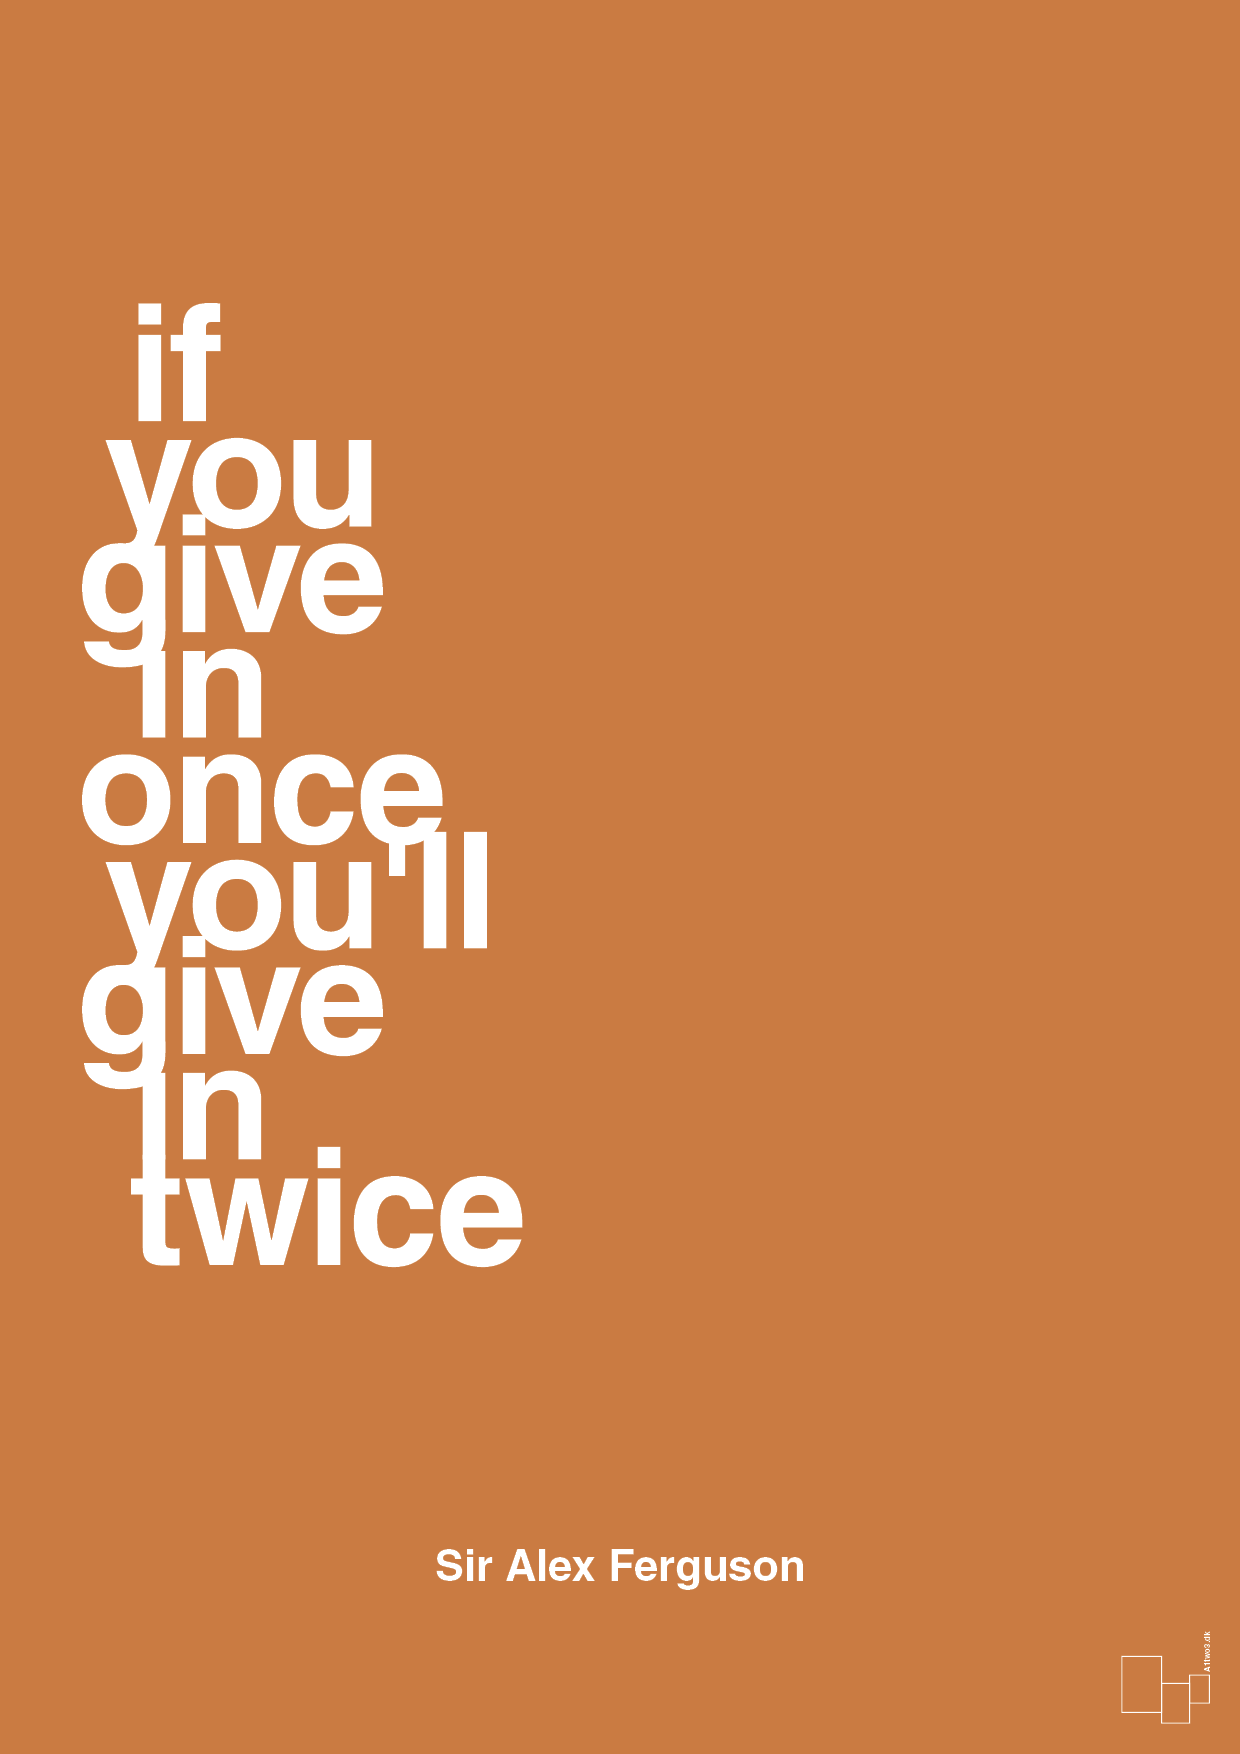 if you give in once you'll give in twice - Plakat med Citater i Rumba Orange